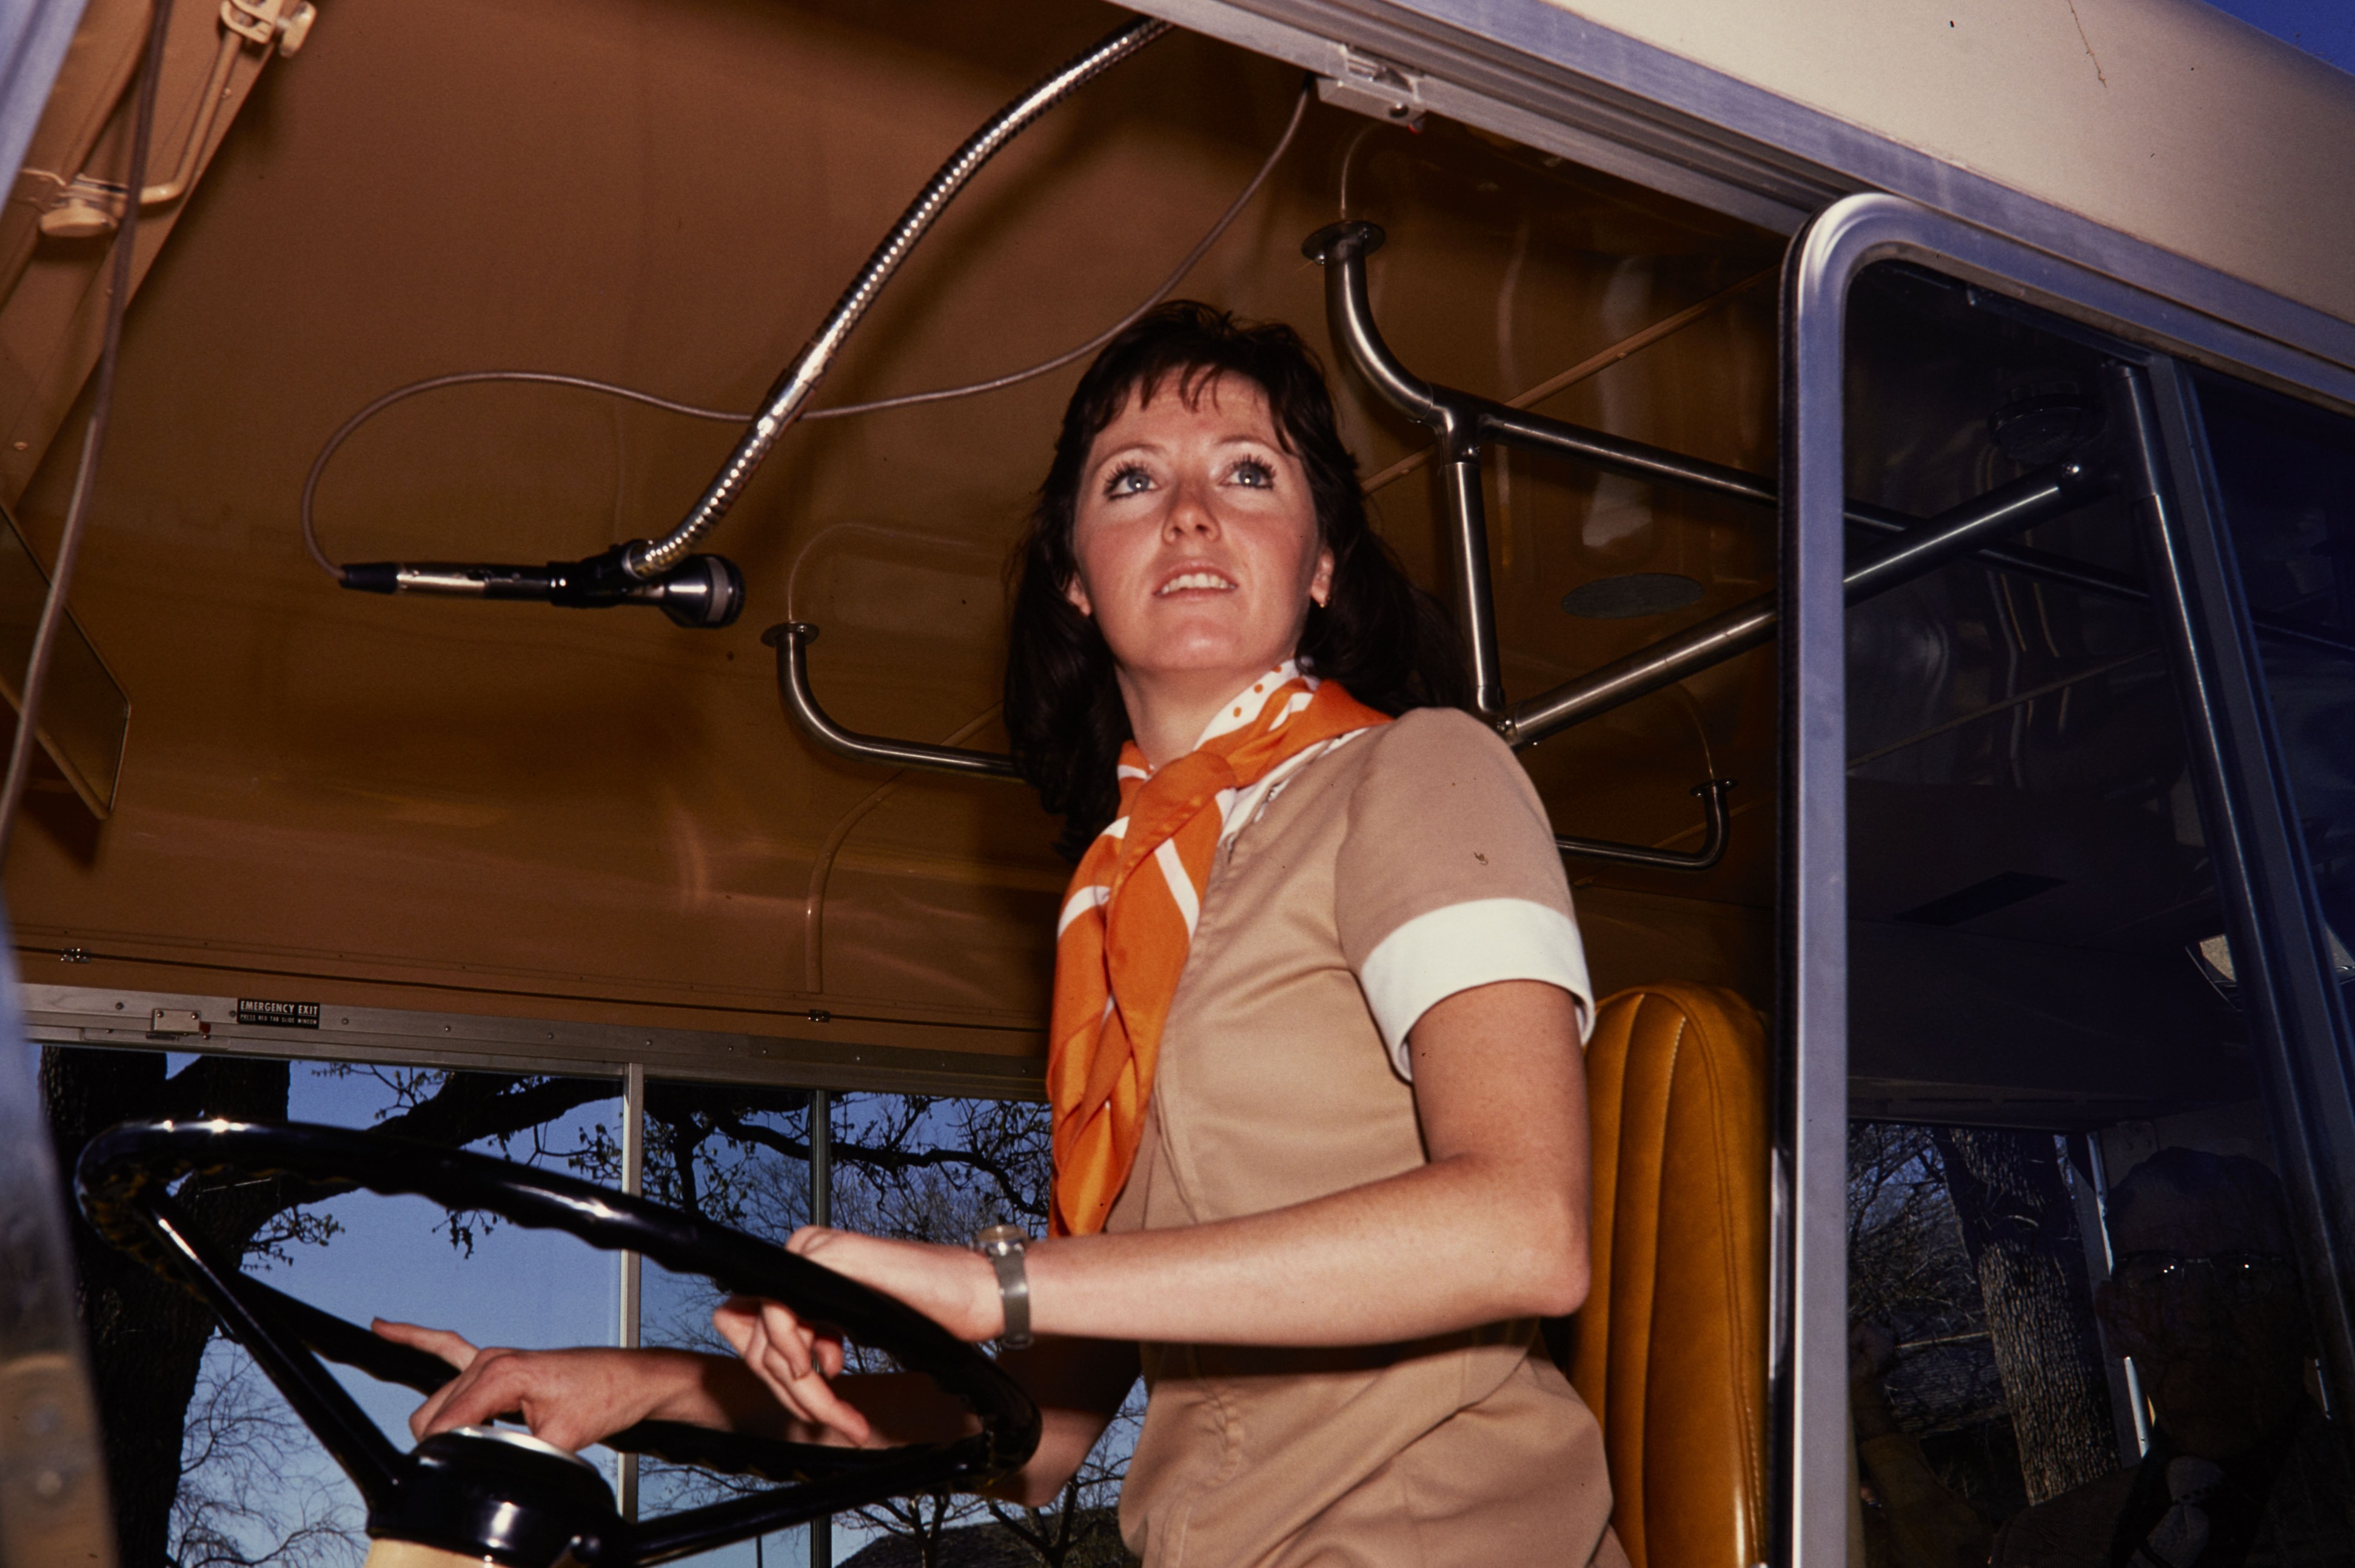 Woman in her NPS uniform sits in the driver's seat of a bus with her hands  on the steering wheel.